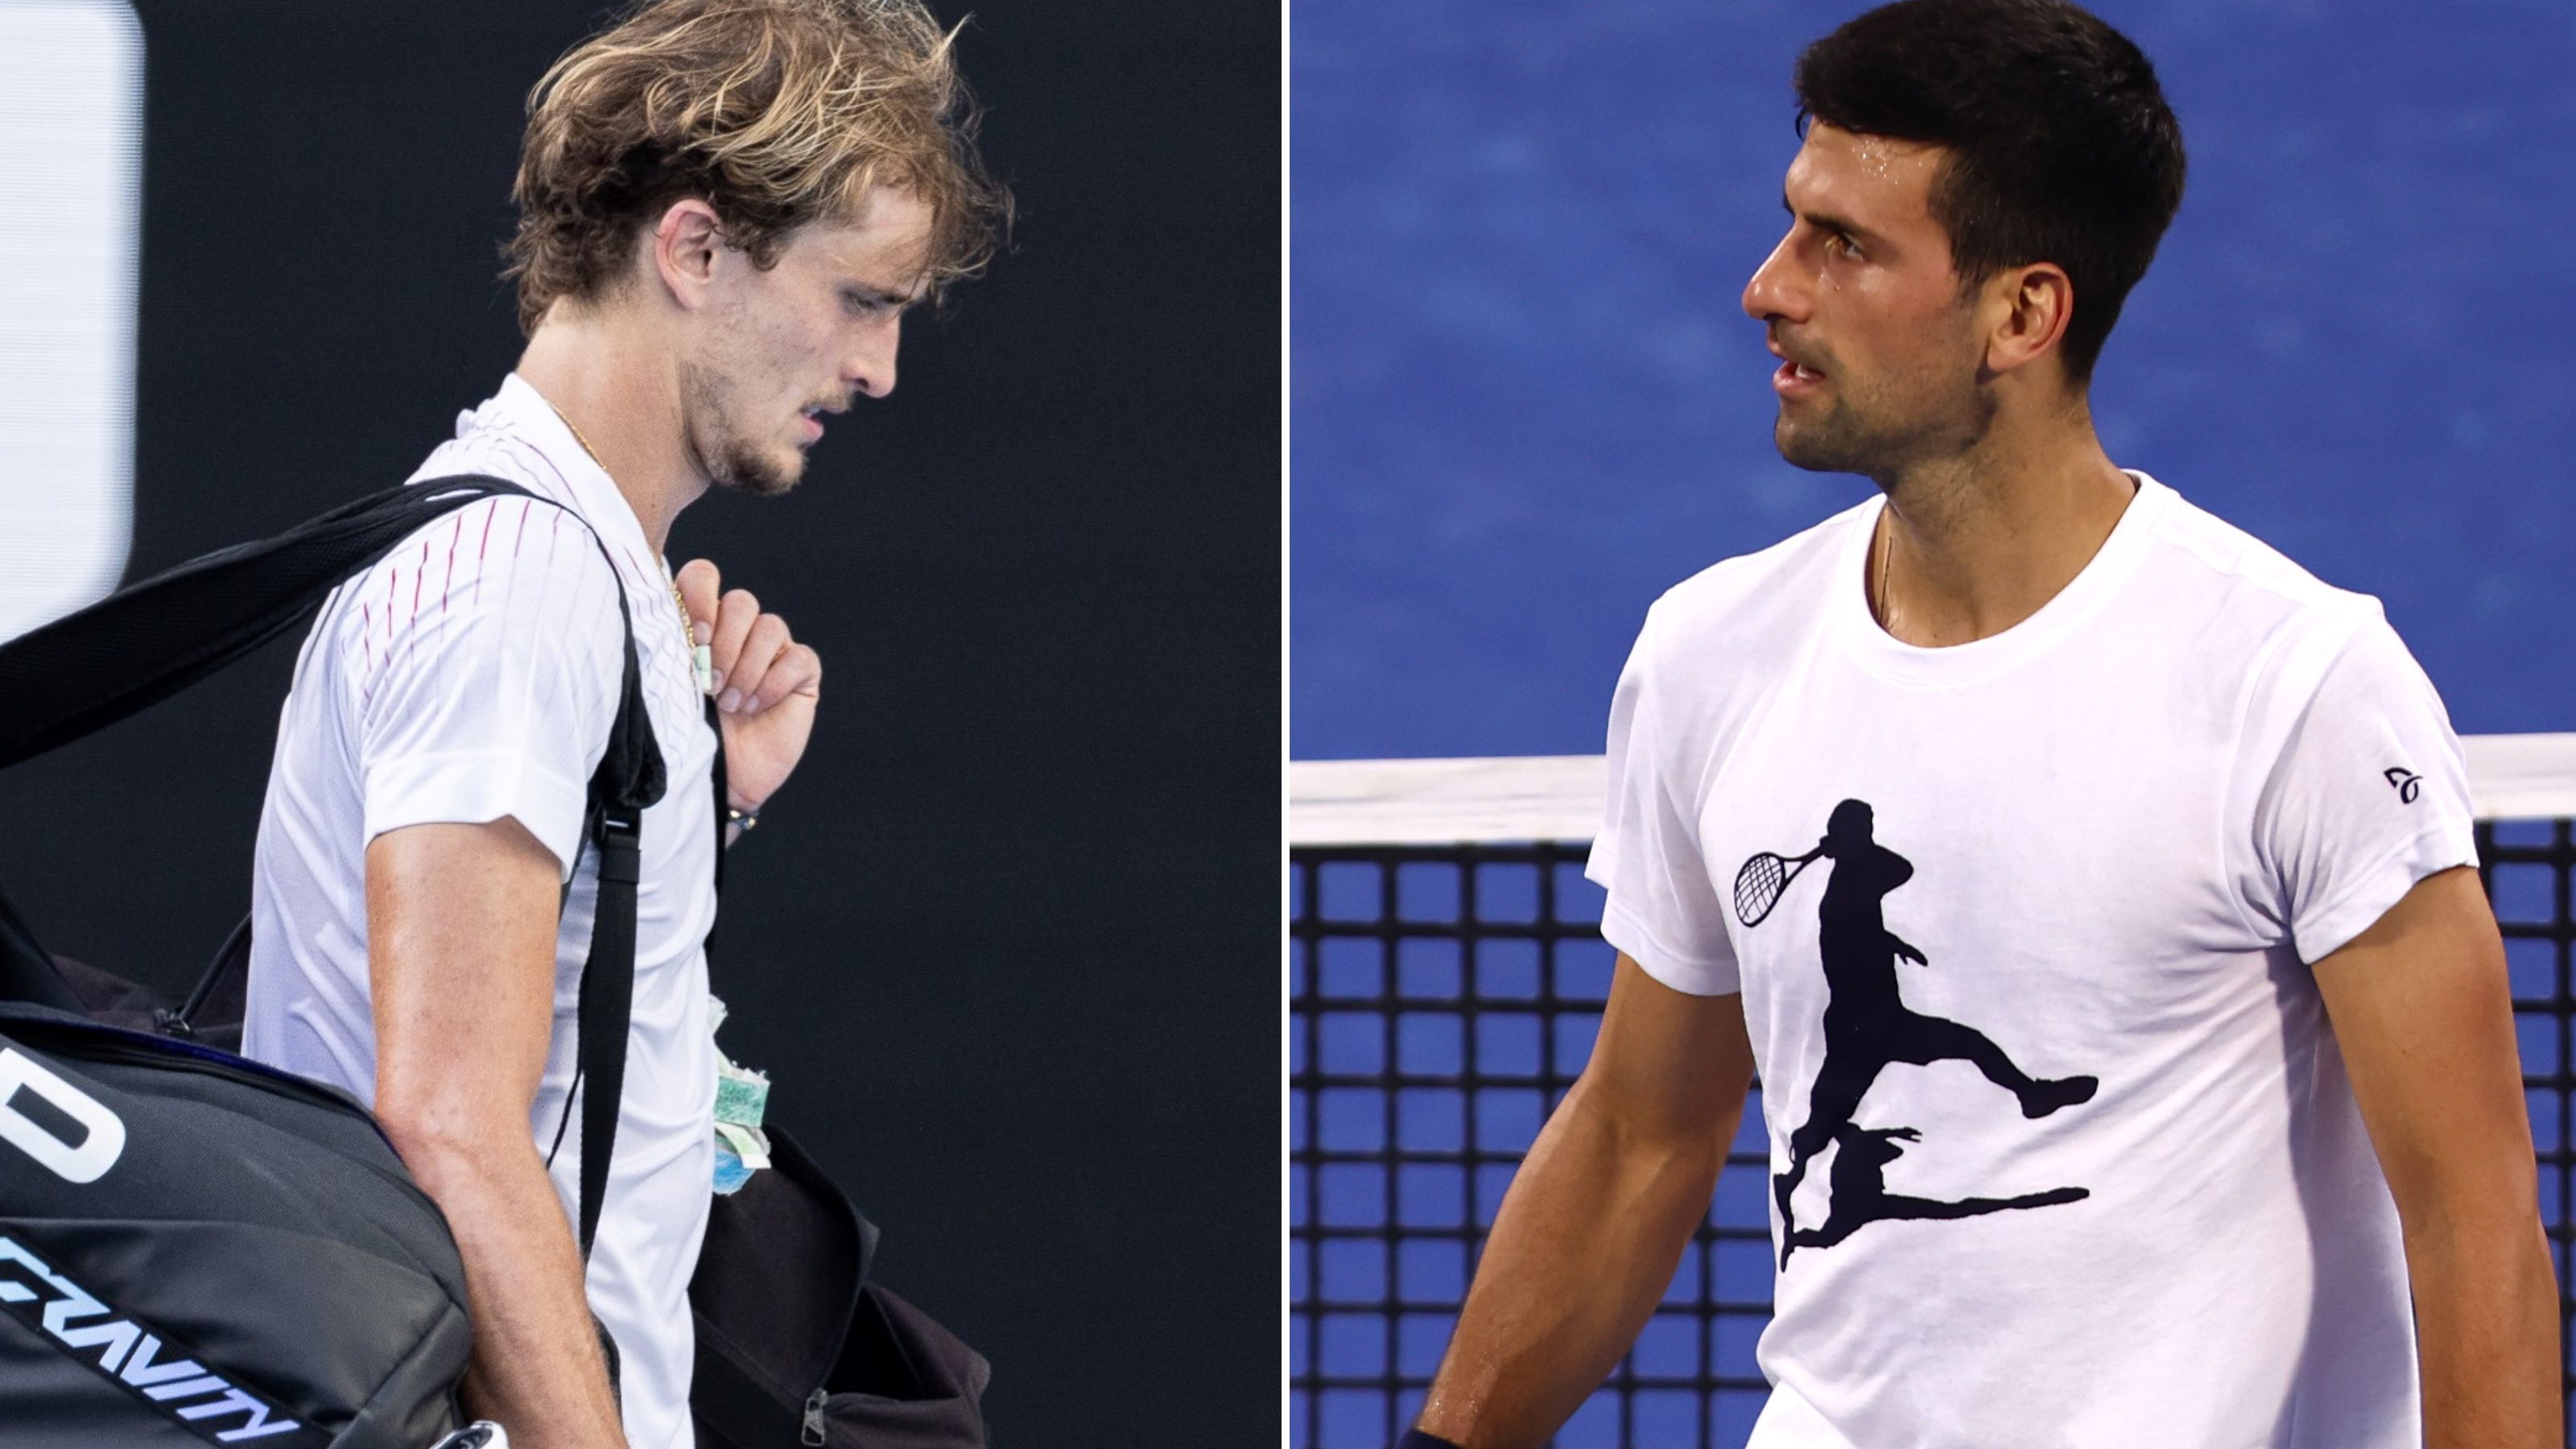 Novak Djokovic, Andy Murray speak after world No.3 Alexander Zverev kicked out of Mexican Open